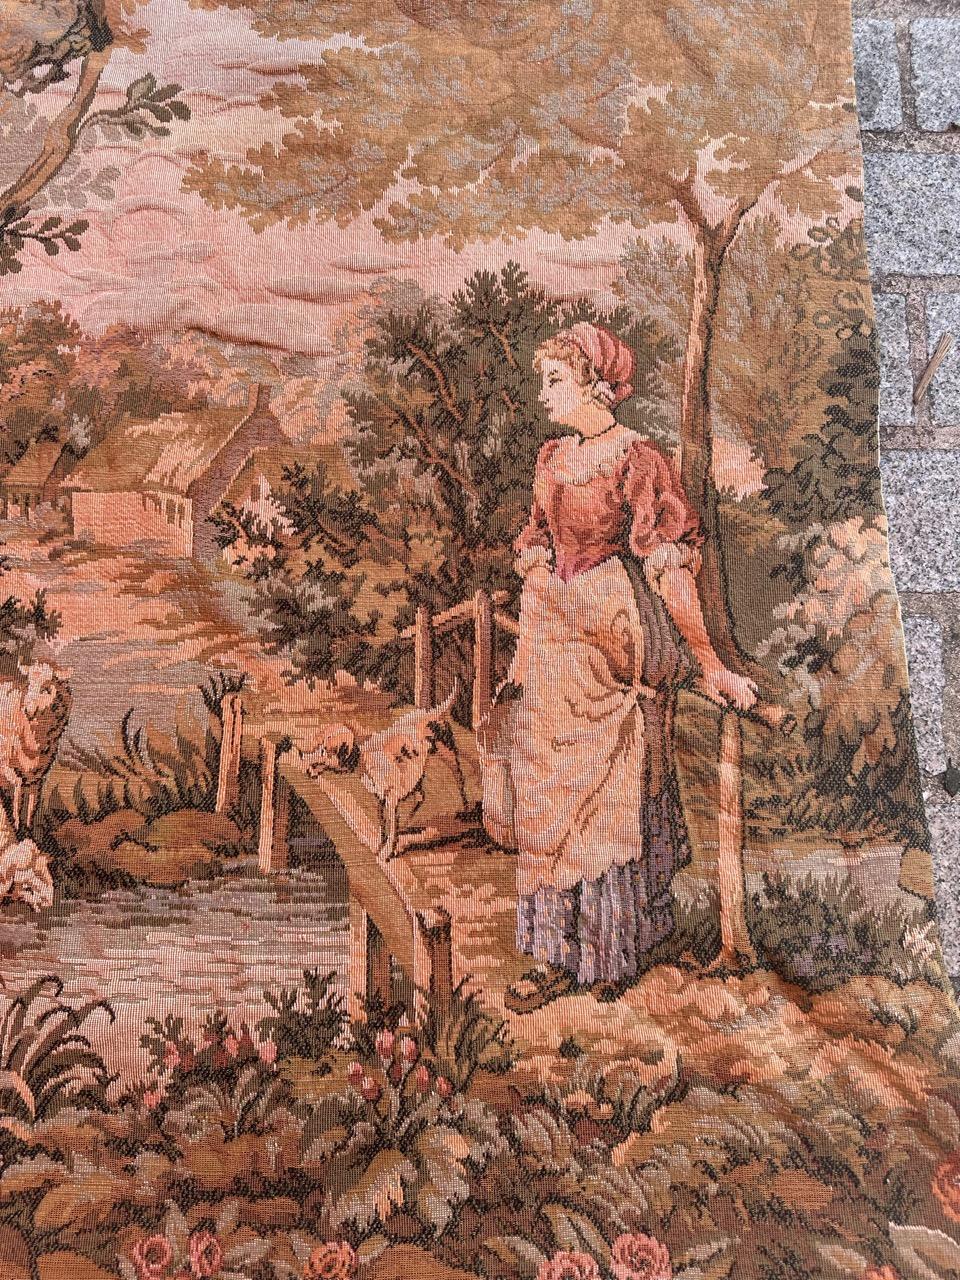 Very beautiful midcentury french tapestry with beautiful design of happy family in the garden enjoying with playing games and music.

✨✨✨
